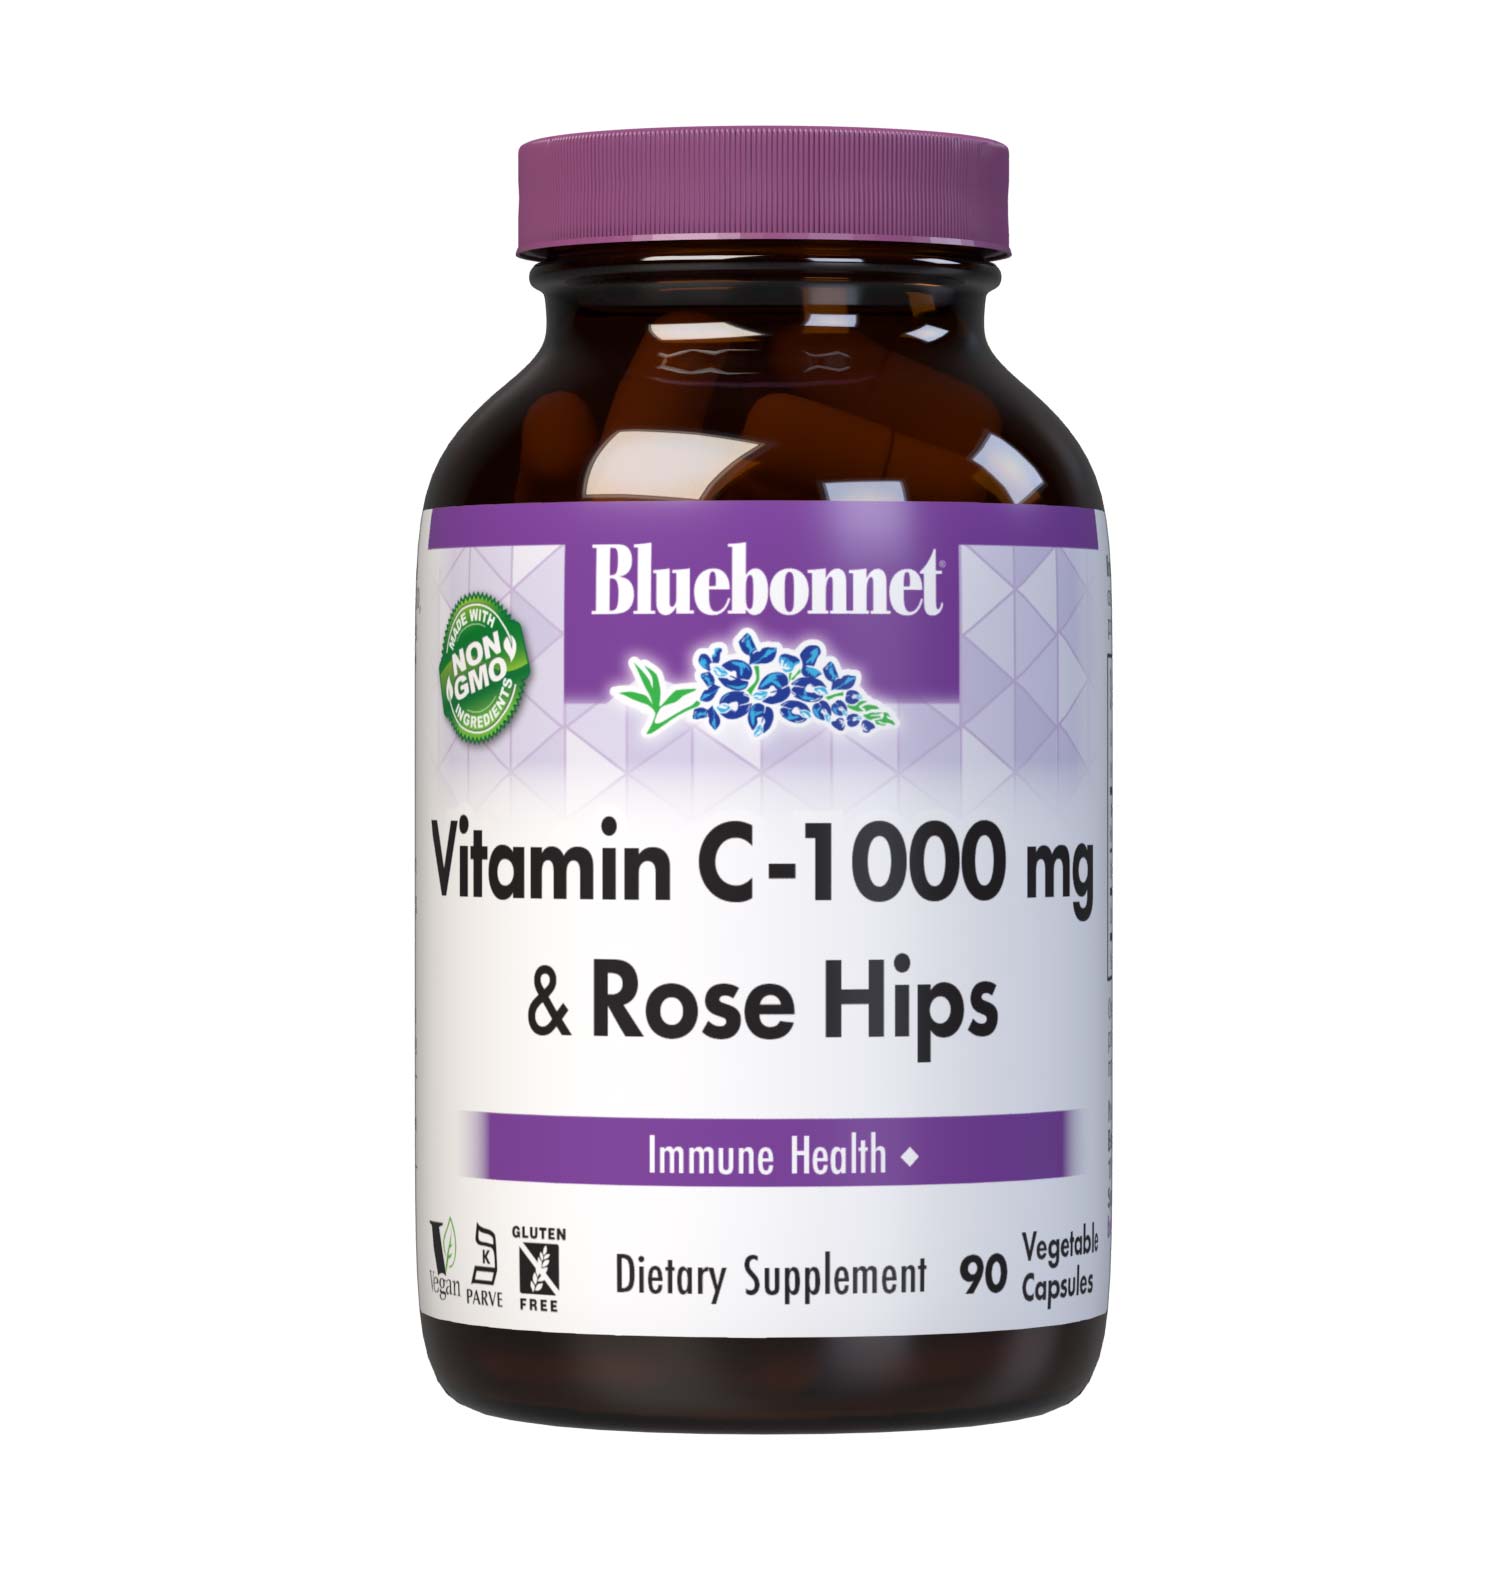 Bluebonnet’s Vitamin C-1000 mg & Rose Hips 90 Vegetable Capsules are formulated with non-GMO, identity preserved (IP) vitamin C from L-ascorbic acid and rose hips to help support immune function. #size_90 count